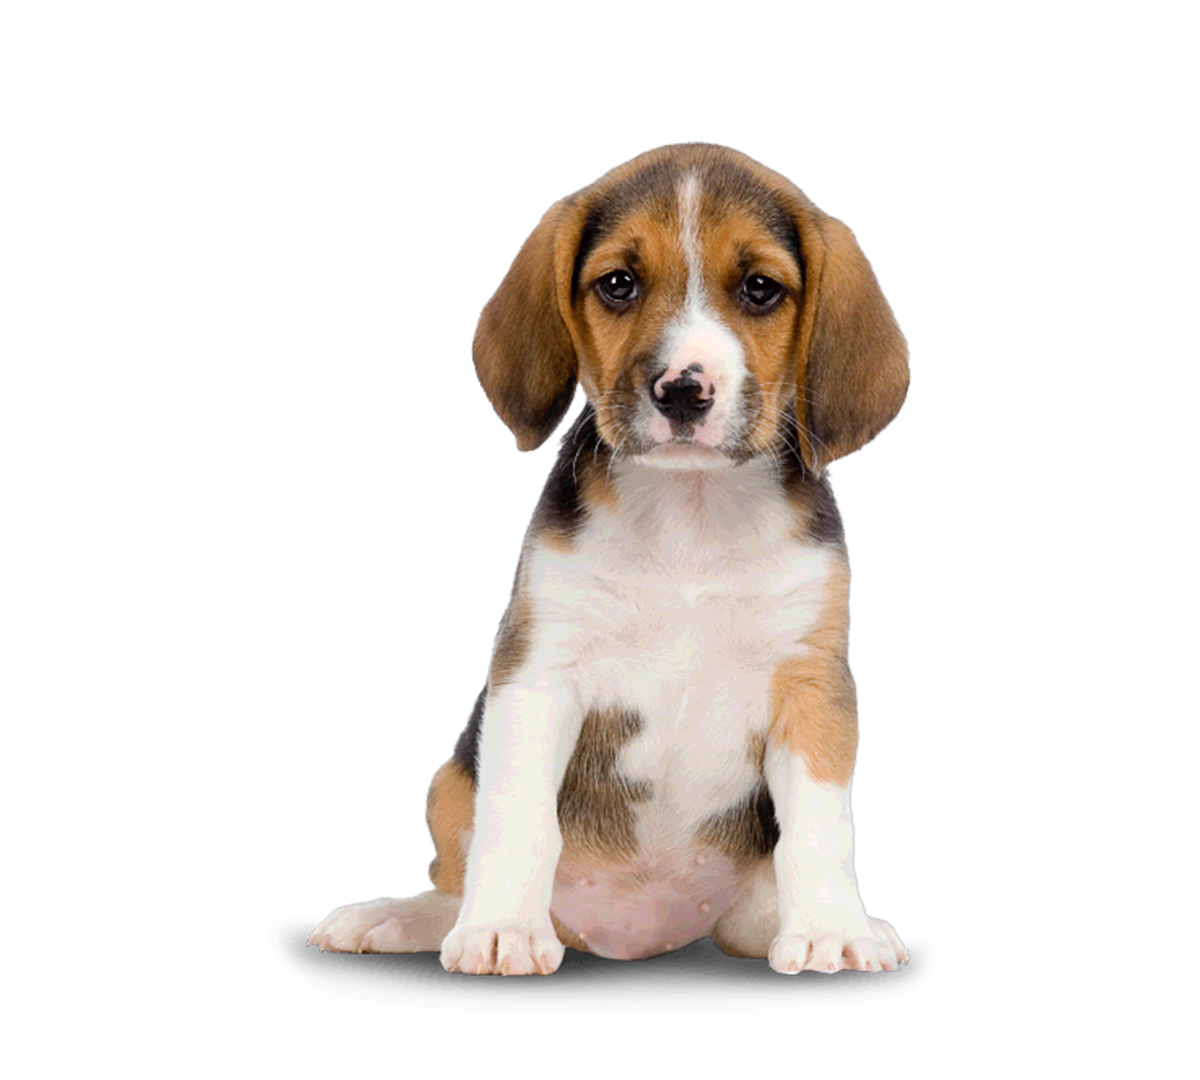 https://pamperedpawssd.com/wp-content/uploads/2020/07/beagle-about.png